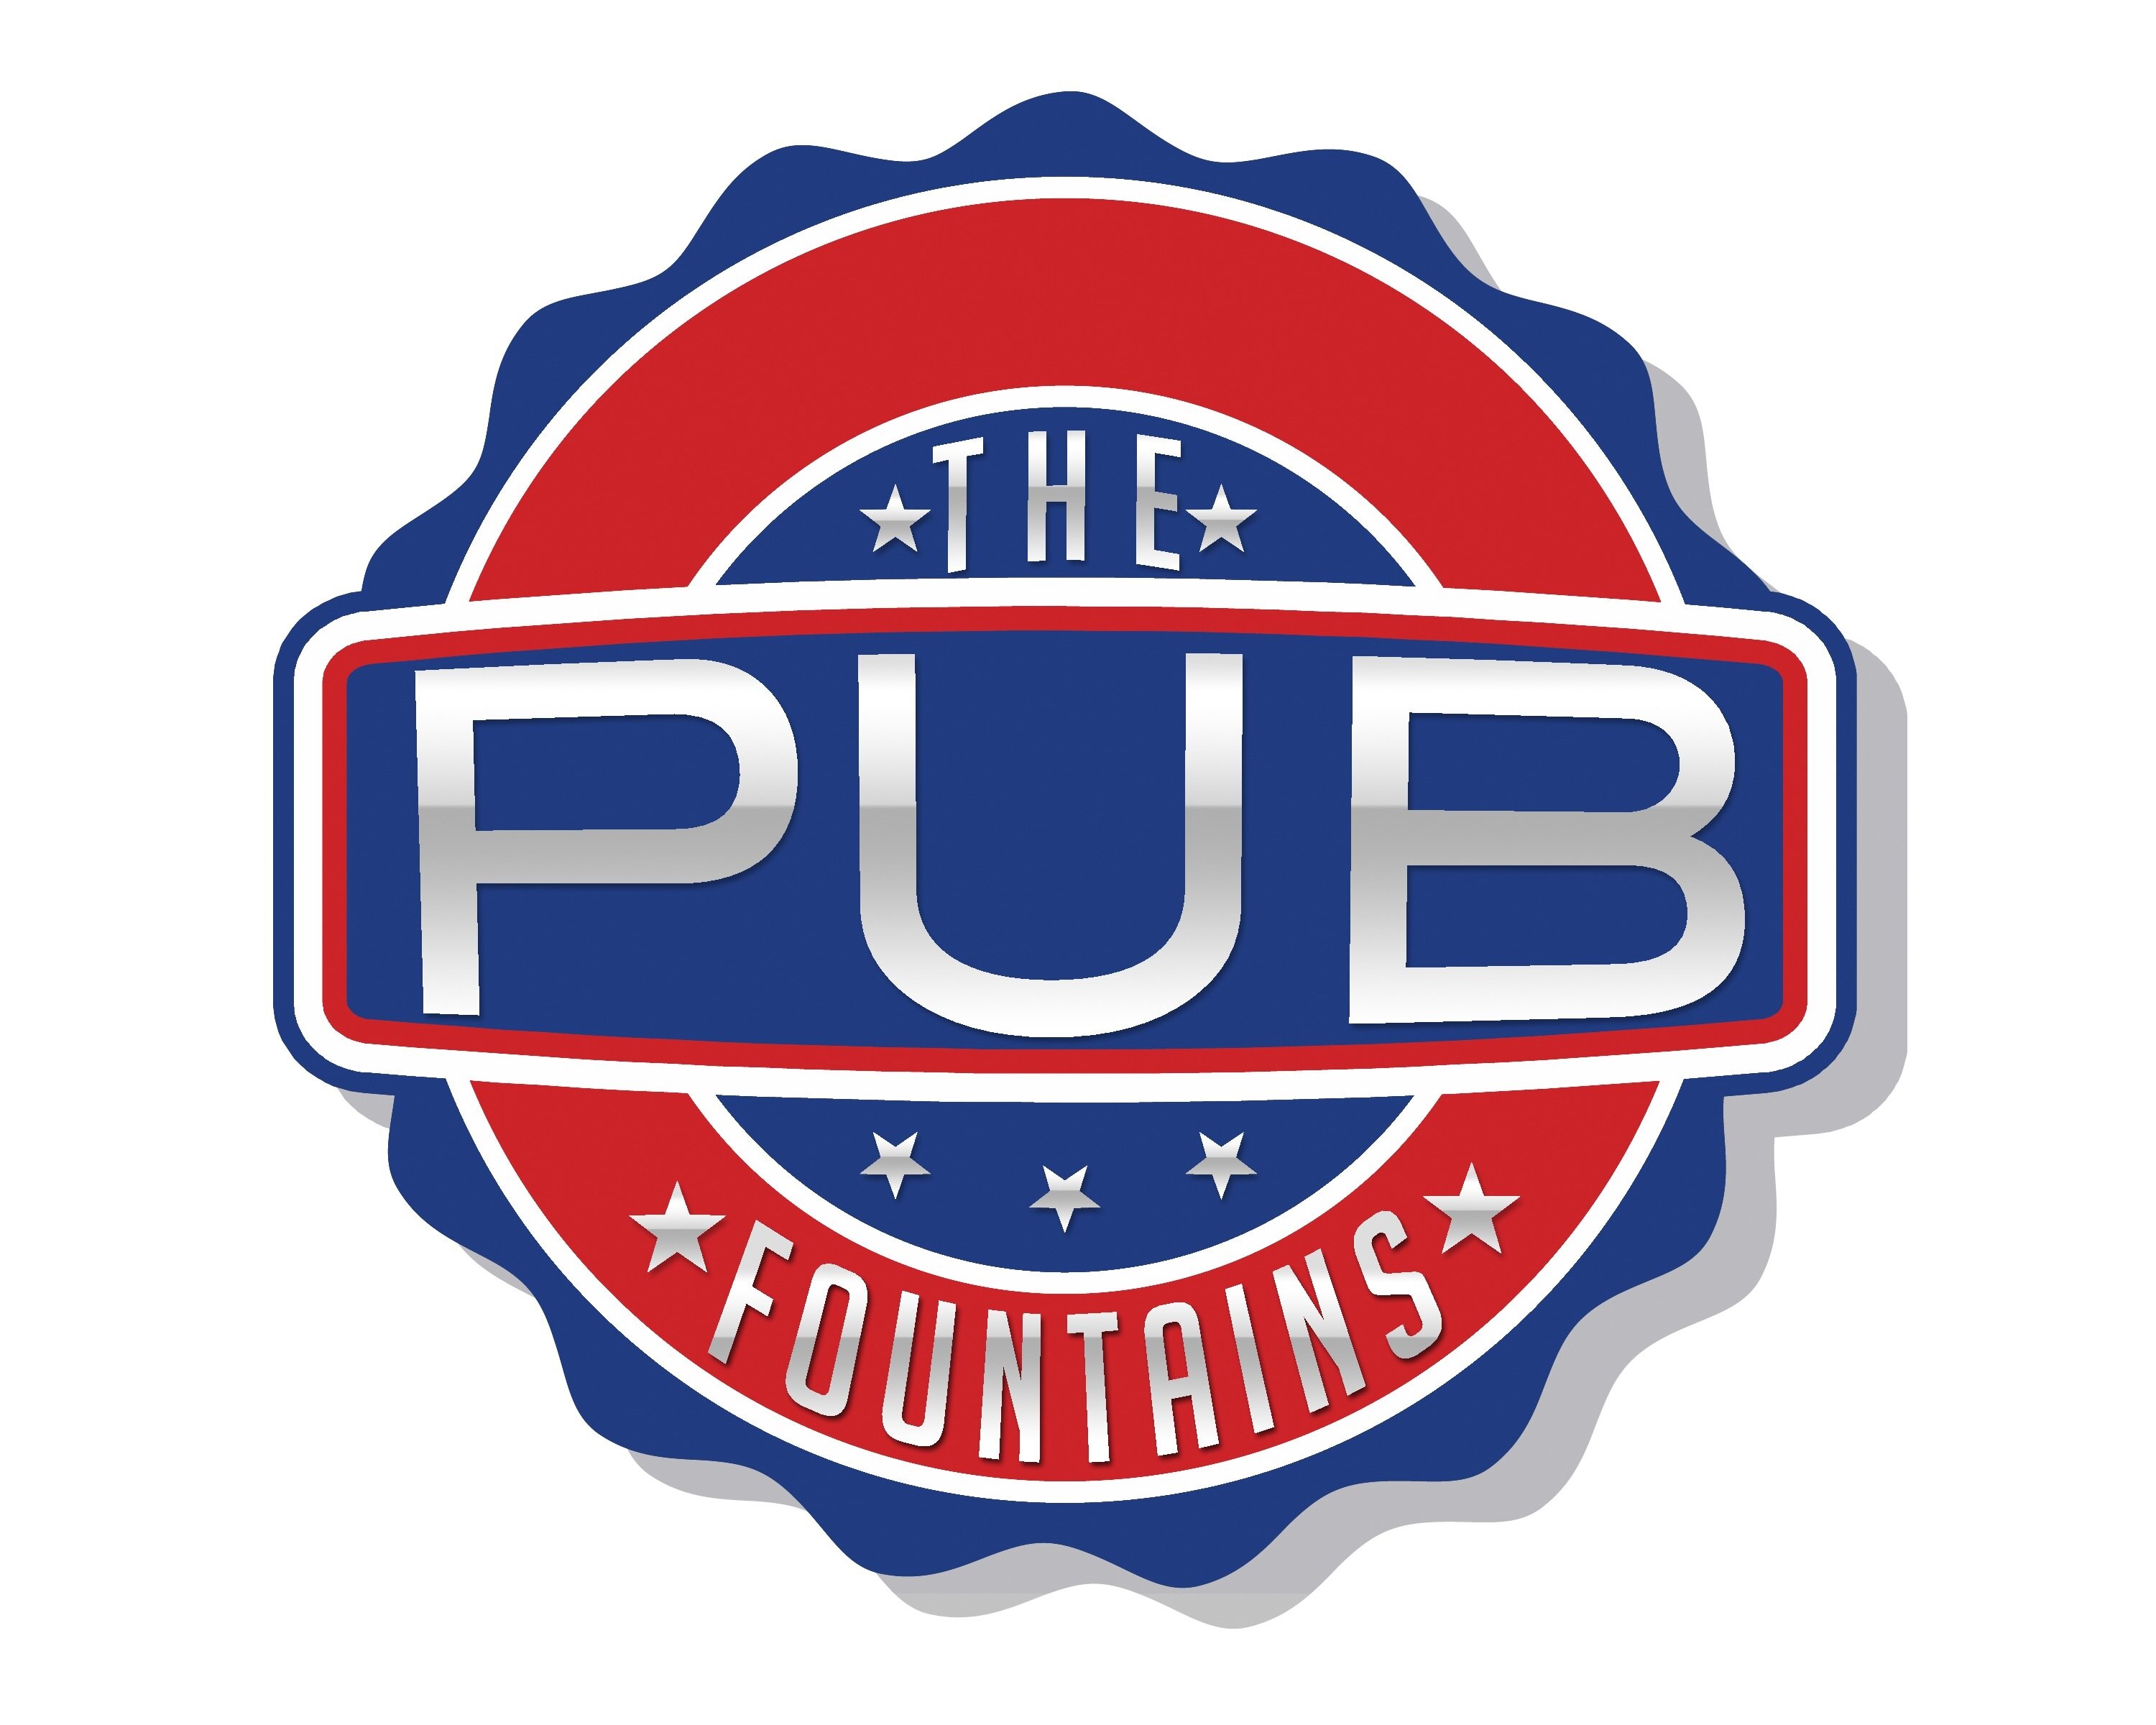 Live Entertainment and Nightlife Destination at The Fountains in Stafford. Enjoy Music, Craft Beer, Draft, Liquor, Cocktails, Drink and Food